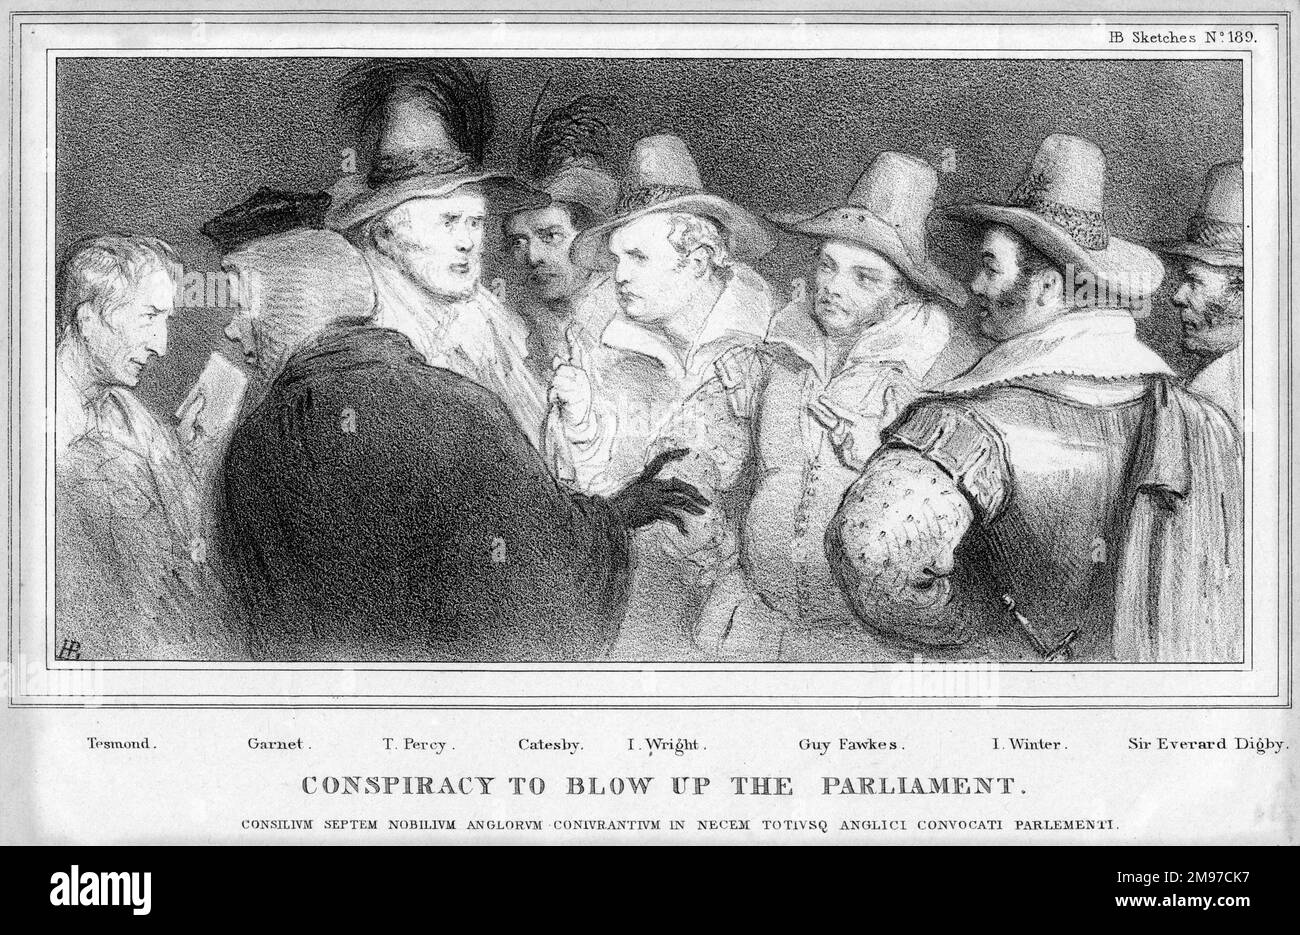 Early 19th century impression of the main protagonists in the conspiracy to blow up Parliament in 1605.  From left, Tesmond, Garnet, T. Percy, Catesby, I. Wright, Guy Fawkes, I. Winter and Sir Everard Digby. Stock Photo